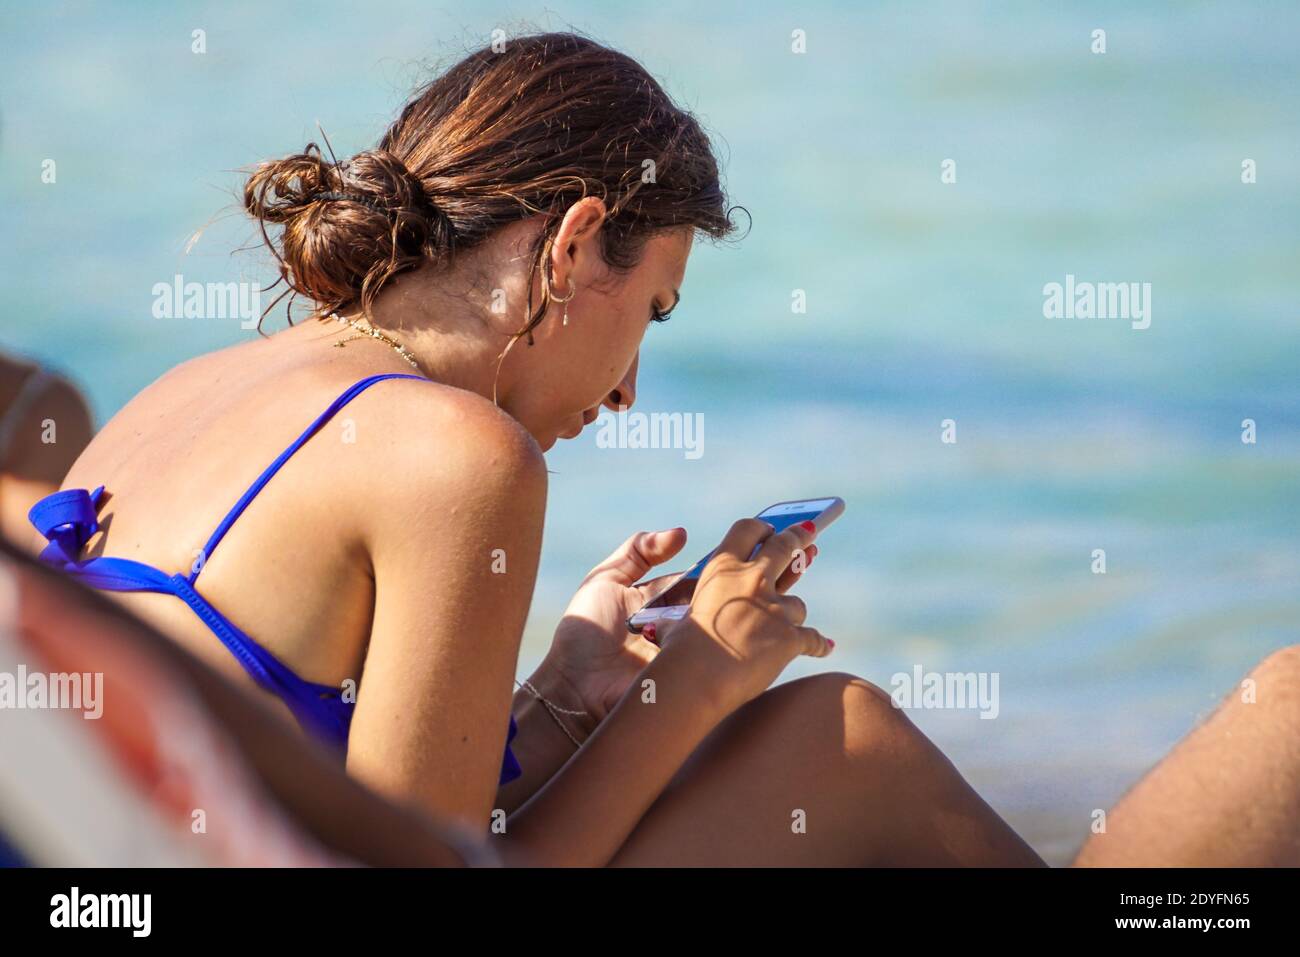 Sardegna , Italy - July 28, 2020 : Unidentified tourists or people they relax by doing leisure activities on the beach in italy Stock Photo